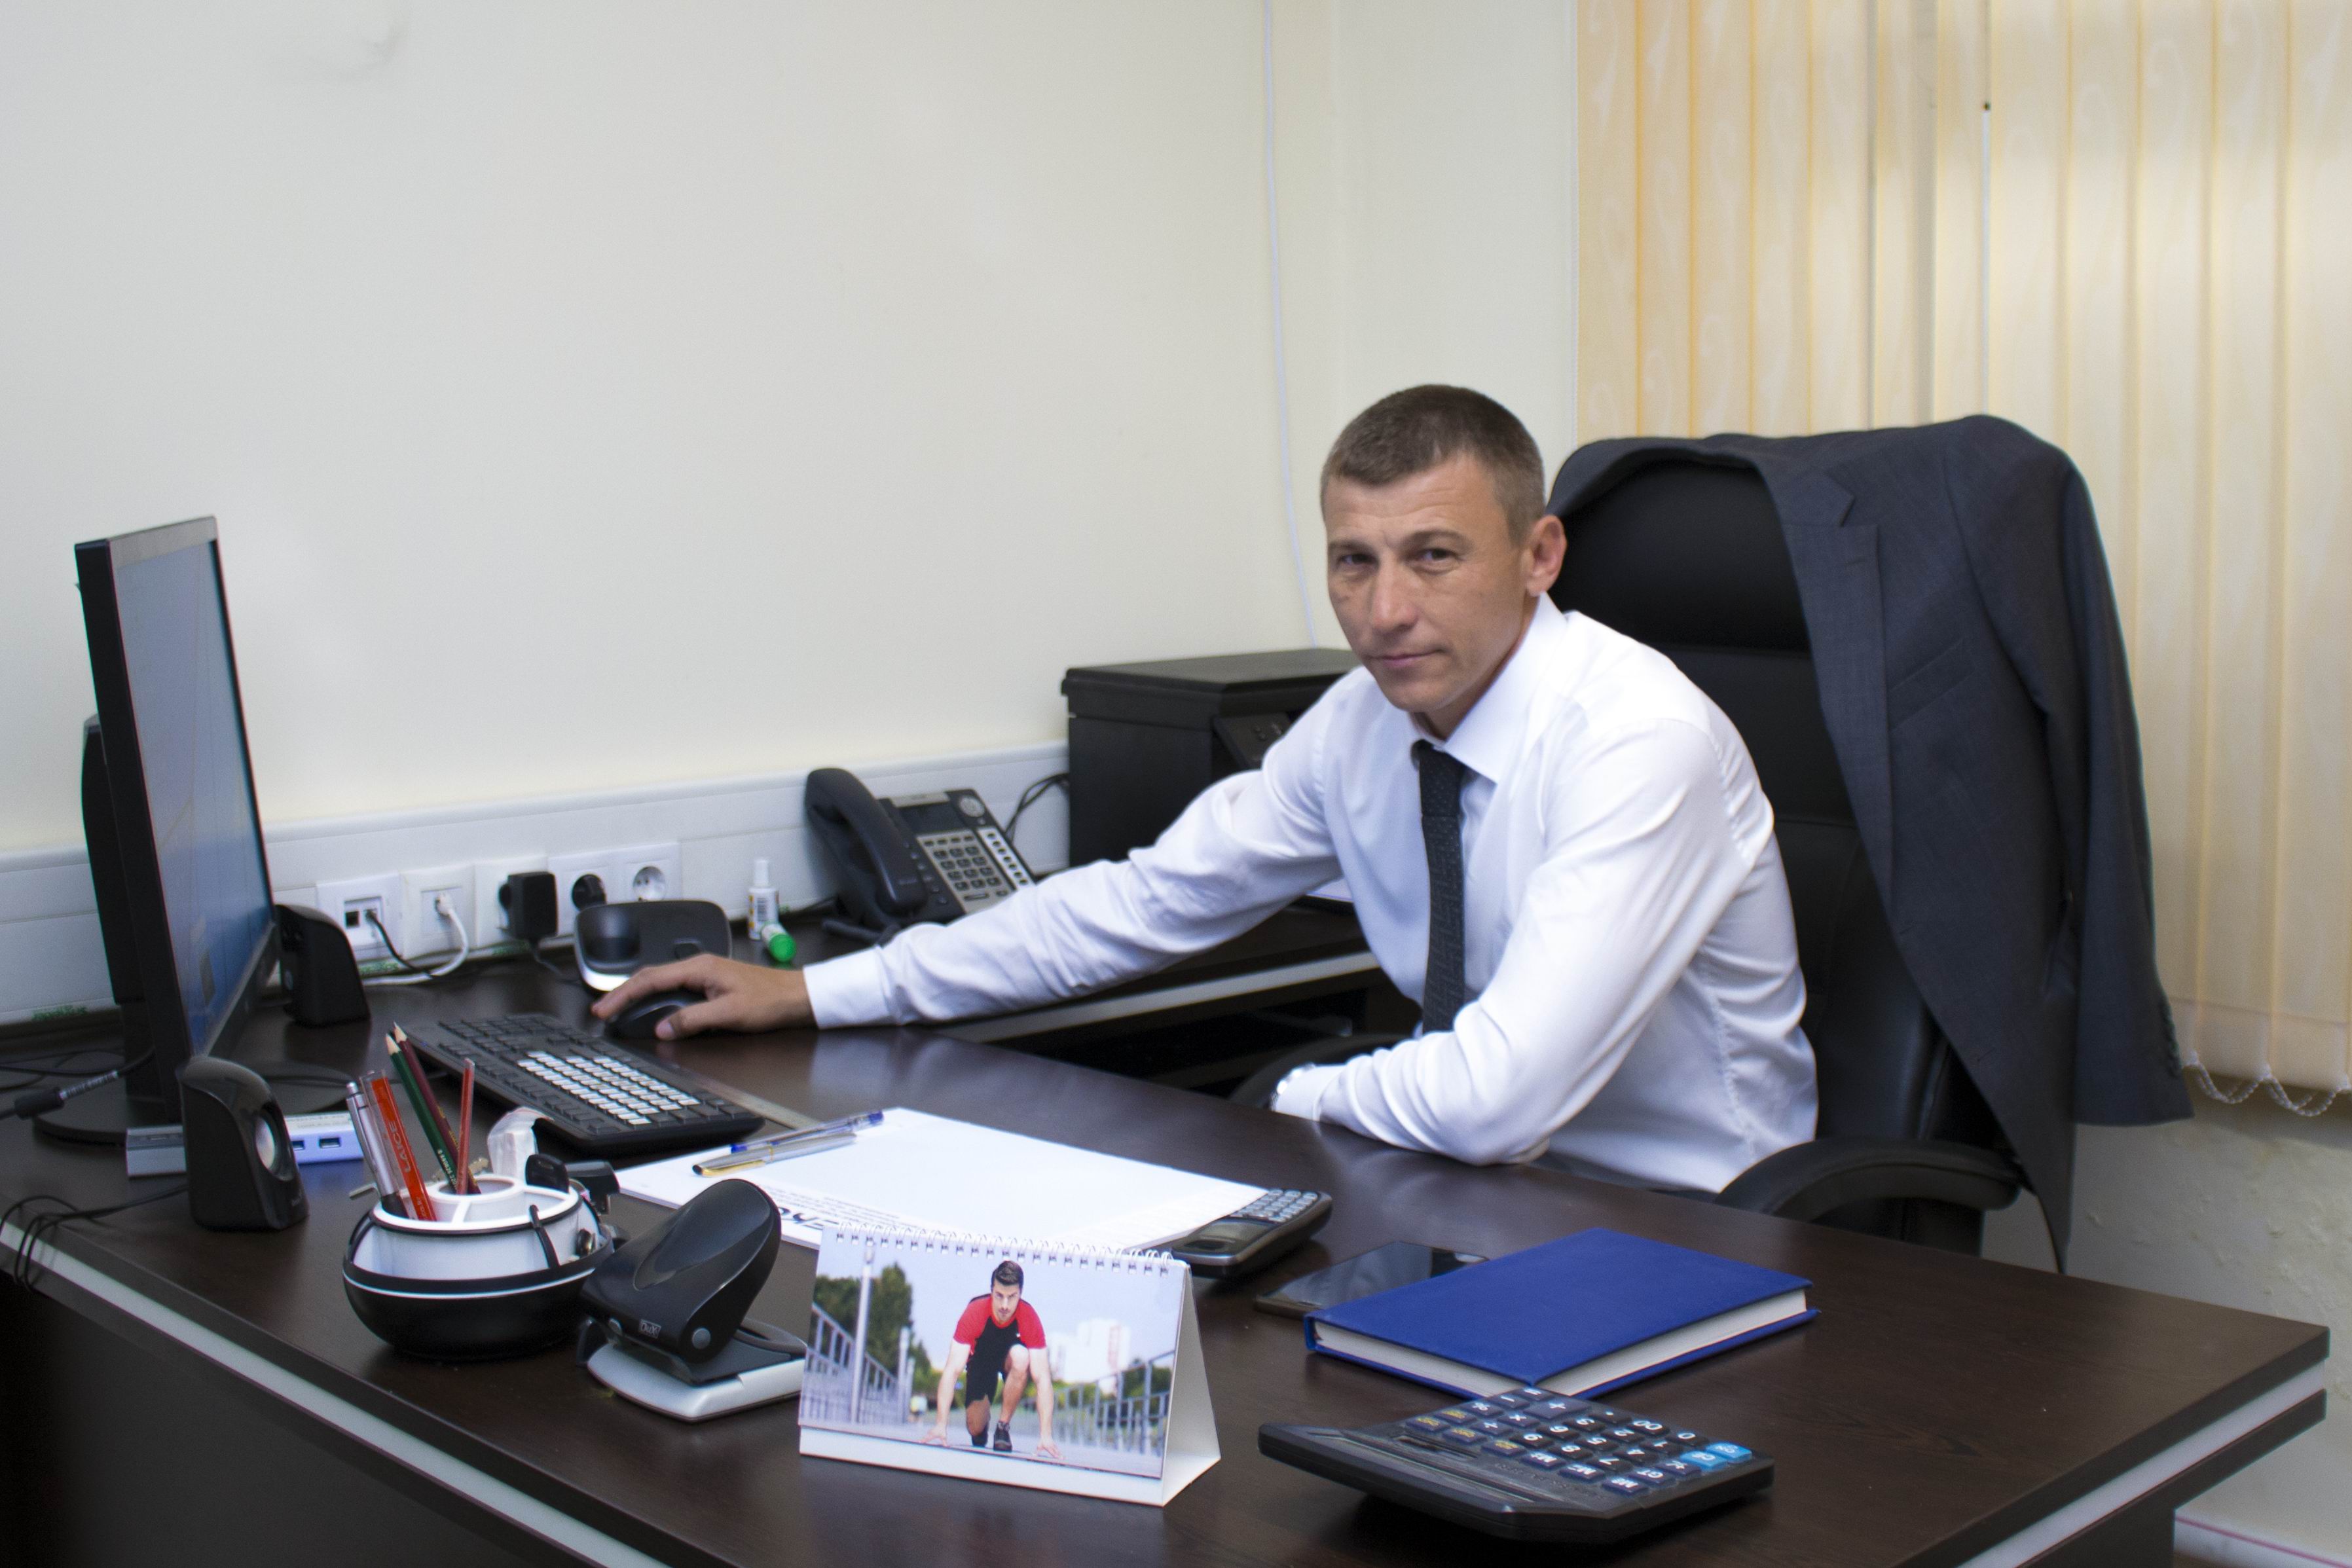 Head of the Implementation Department Victor Bespalov